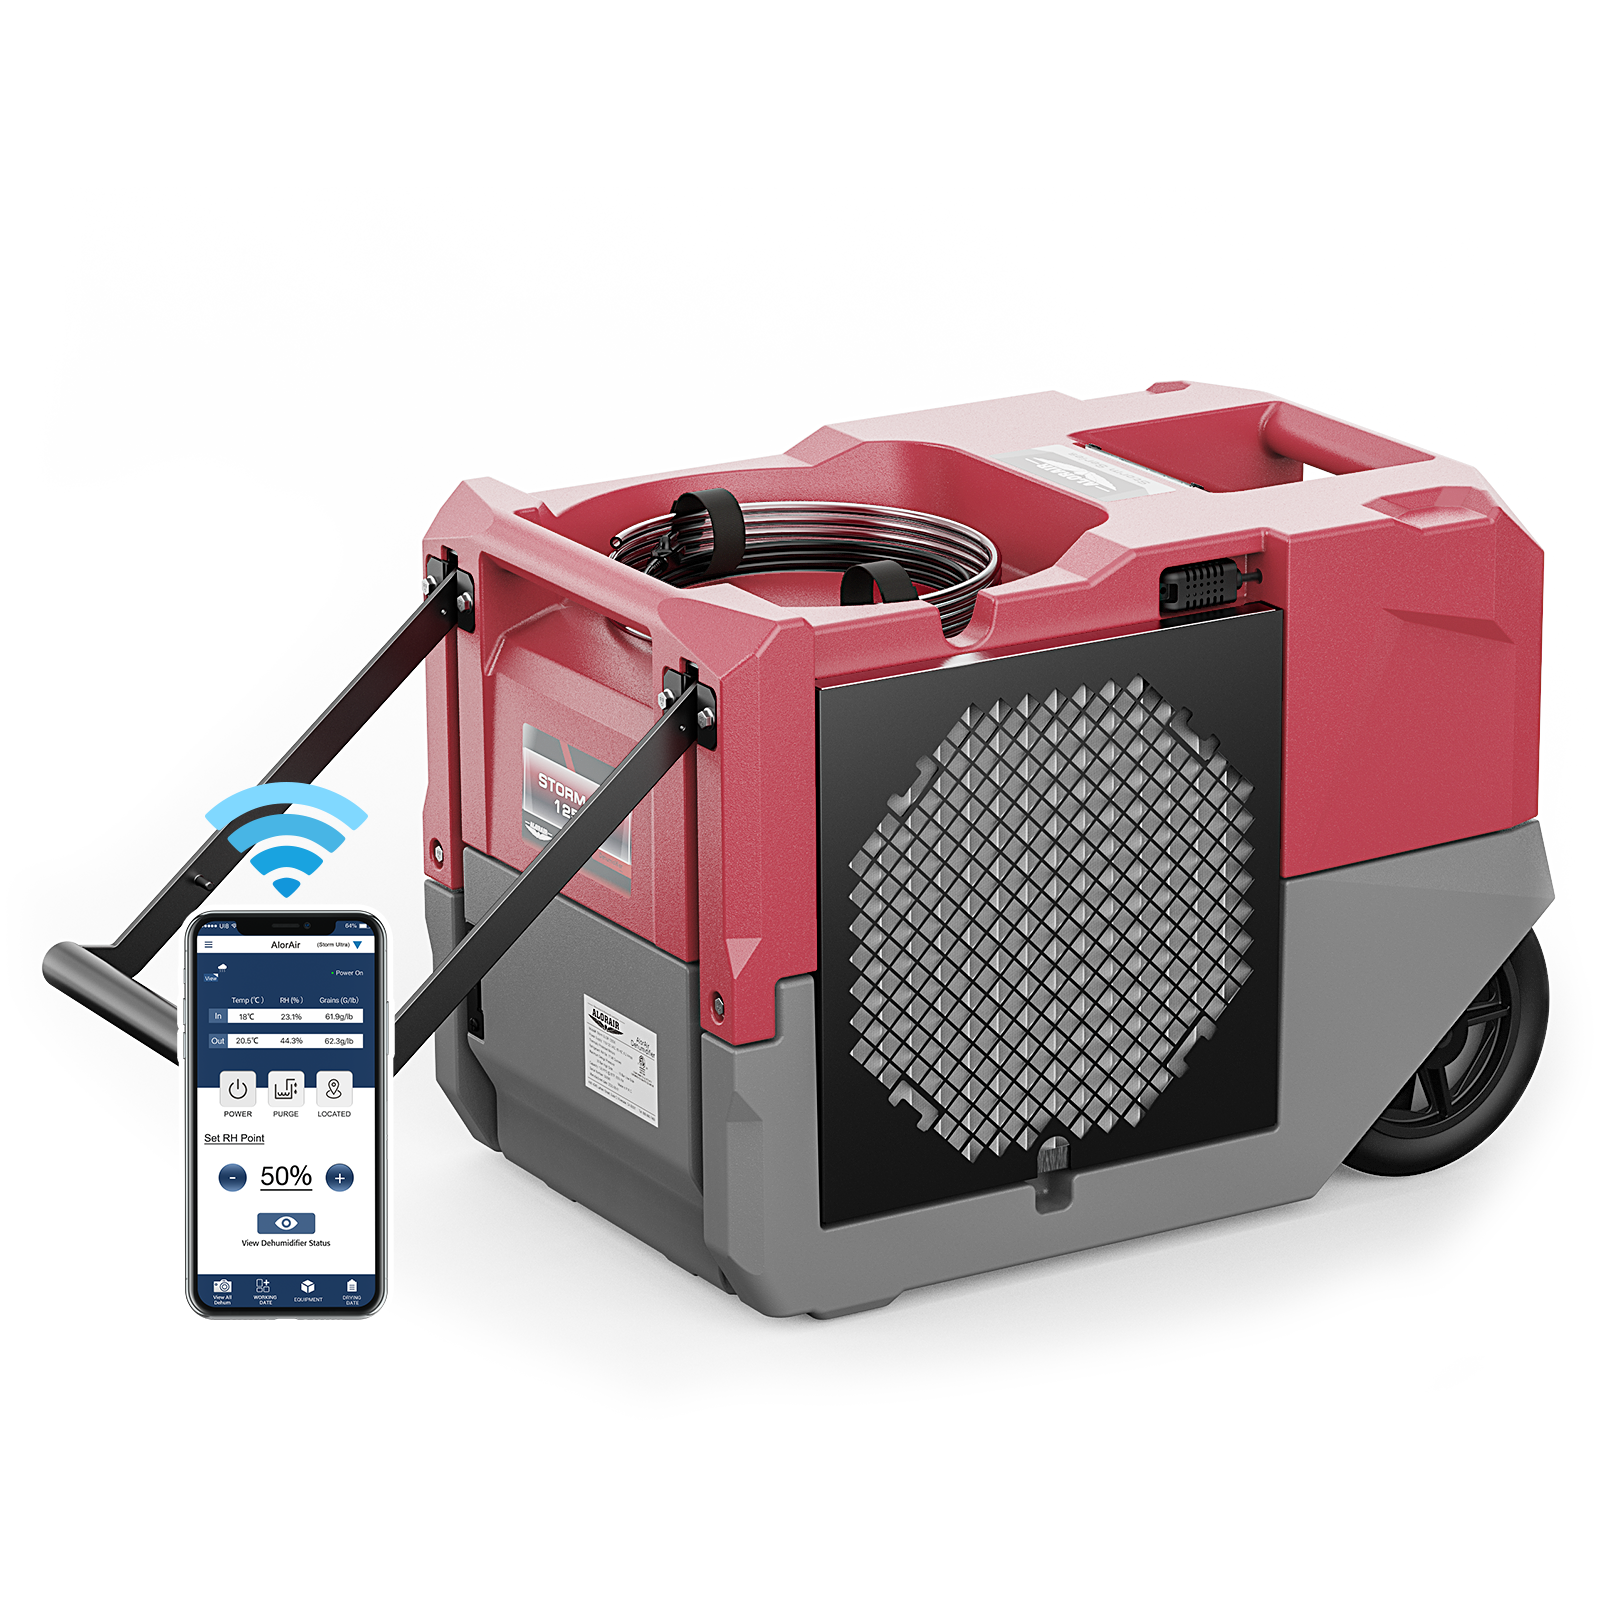 AlorAir® Storm LGR 1250X | Smart Wi-Fi 264 PPD Industrial Commercial Dehumidifiers with Pump for Basements, Garages, and Job Sites, Red